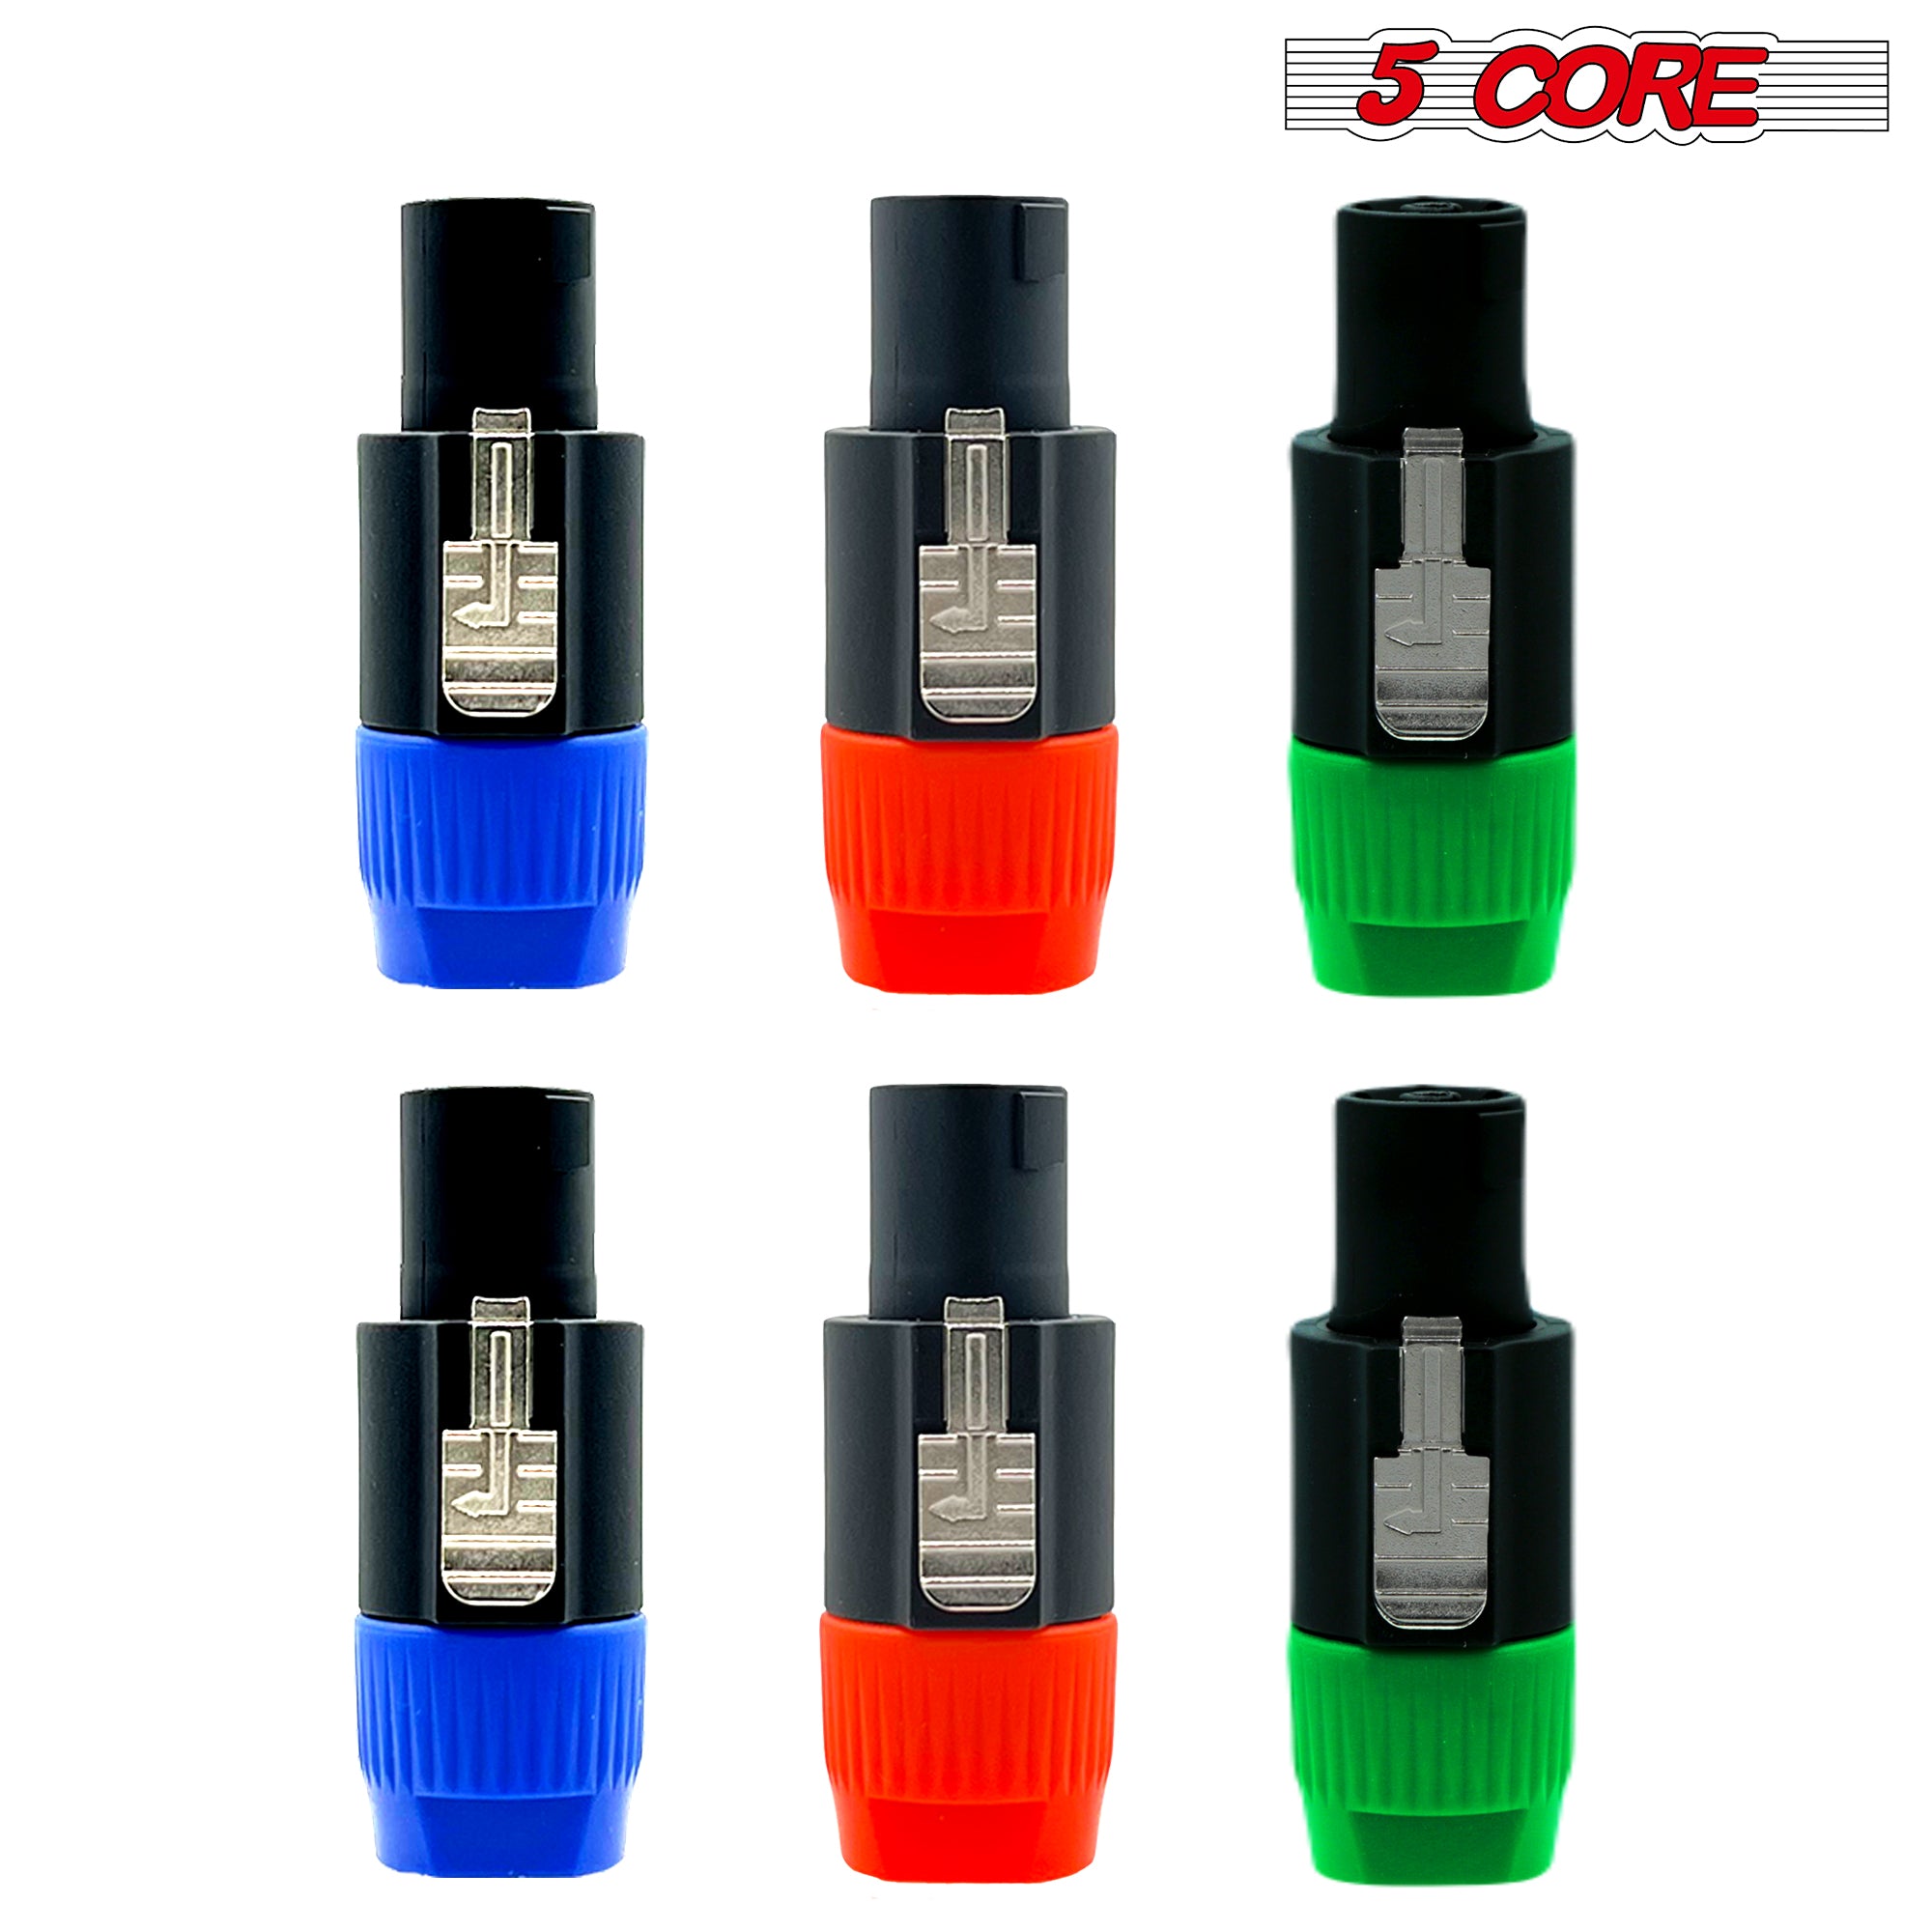 5 Core Speakon Adapter 6 Pack • High Quality Audio Jack Male Audio Pin • Speaker Adapter Connector